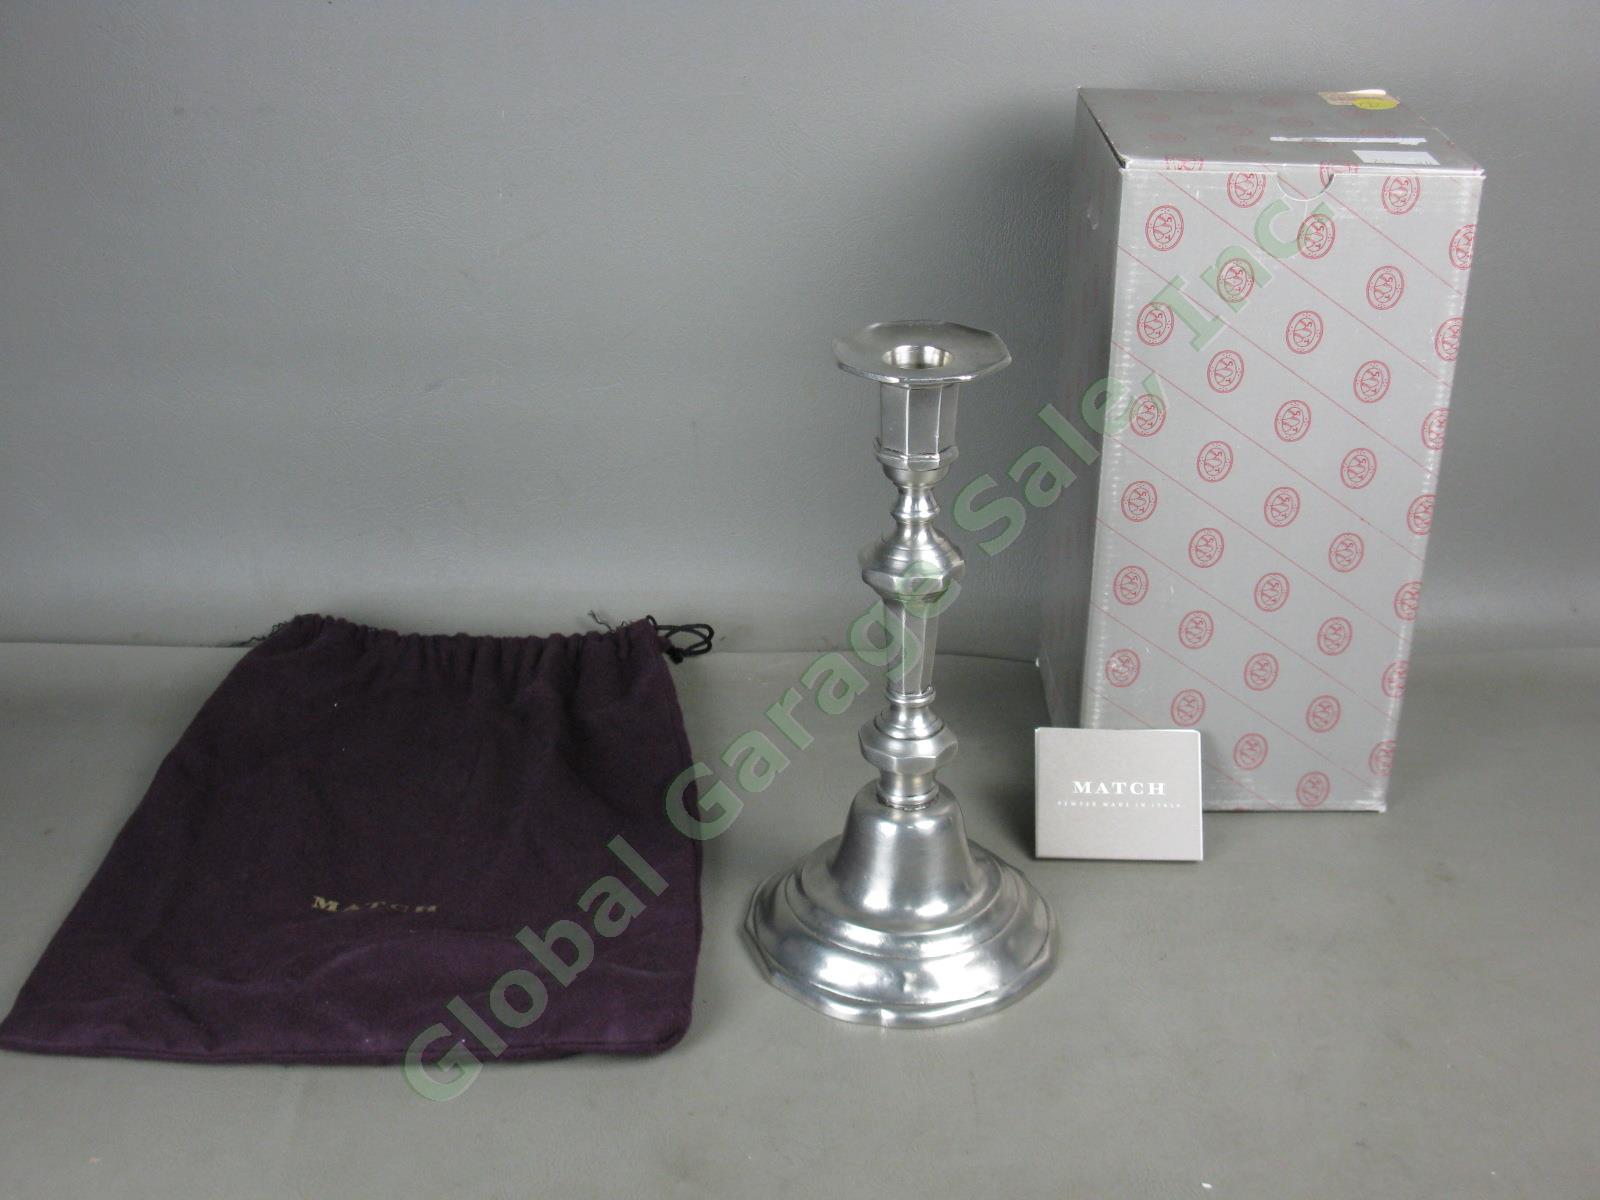 NEW Match Pewter Genoa Candlestick 9.75" Made In Italy $220 Retail No Reserve!